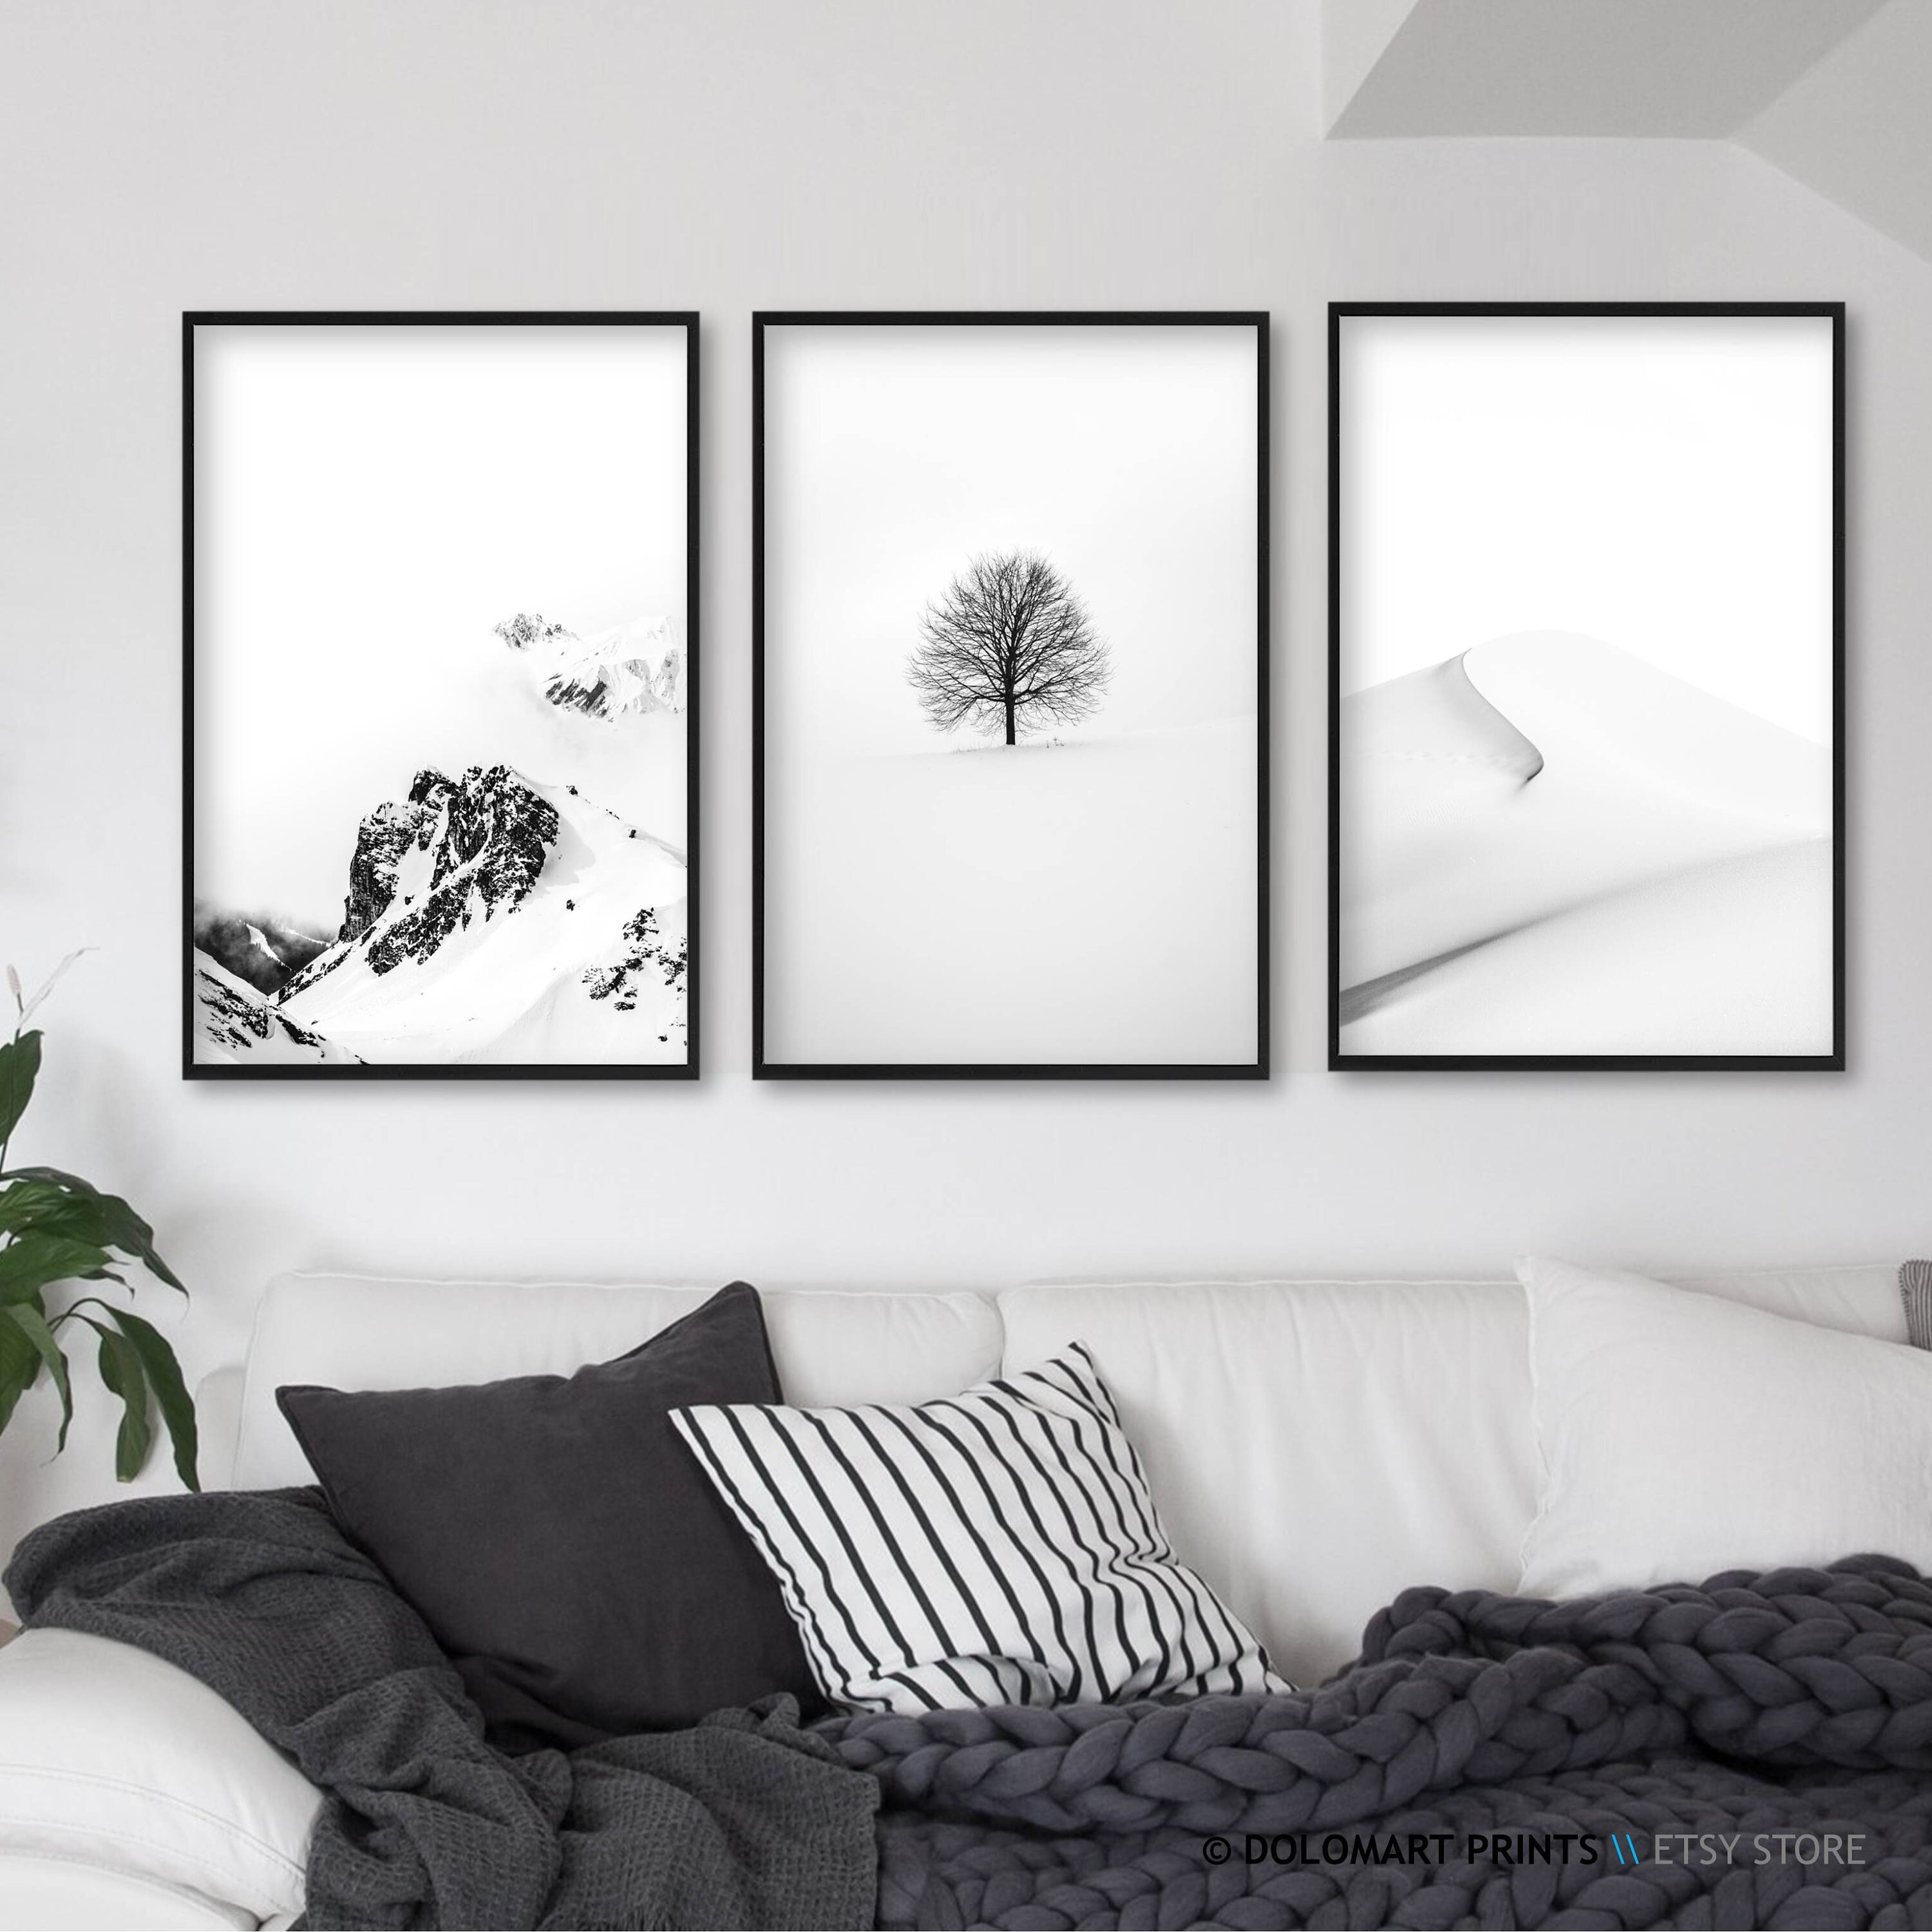 Black and White Photography Prints Minimalist Art Download | Etsy